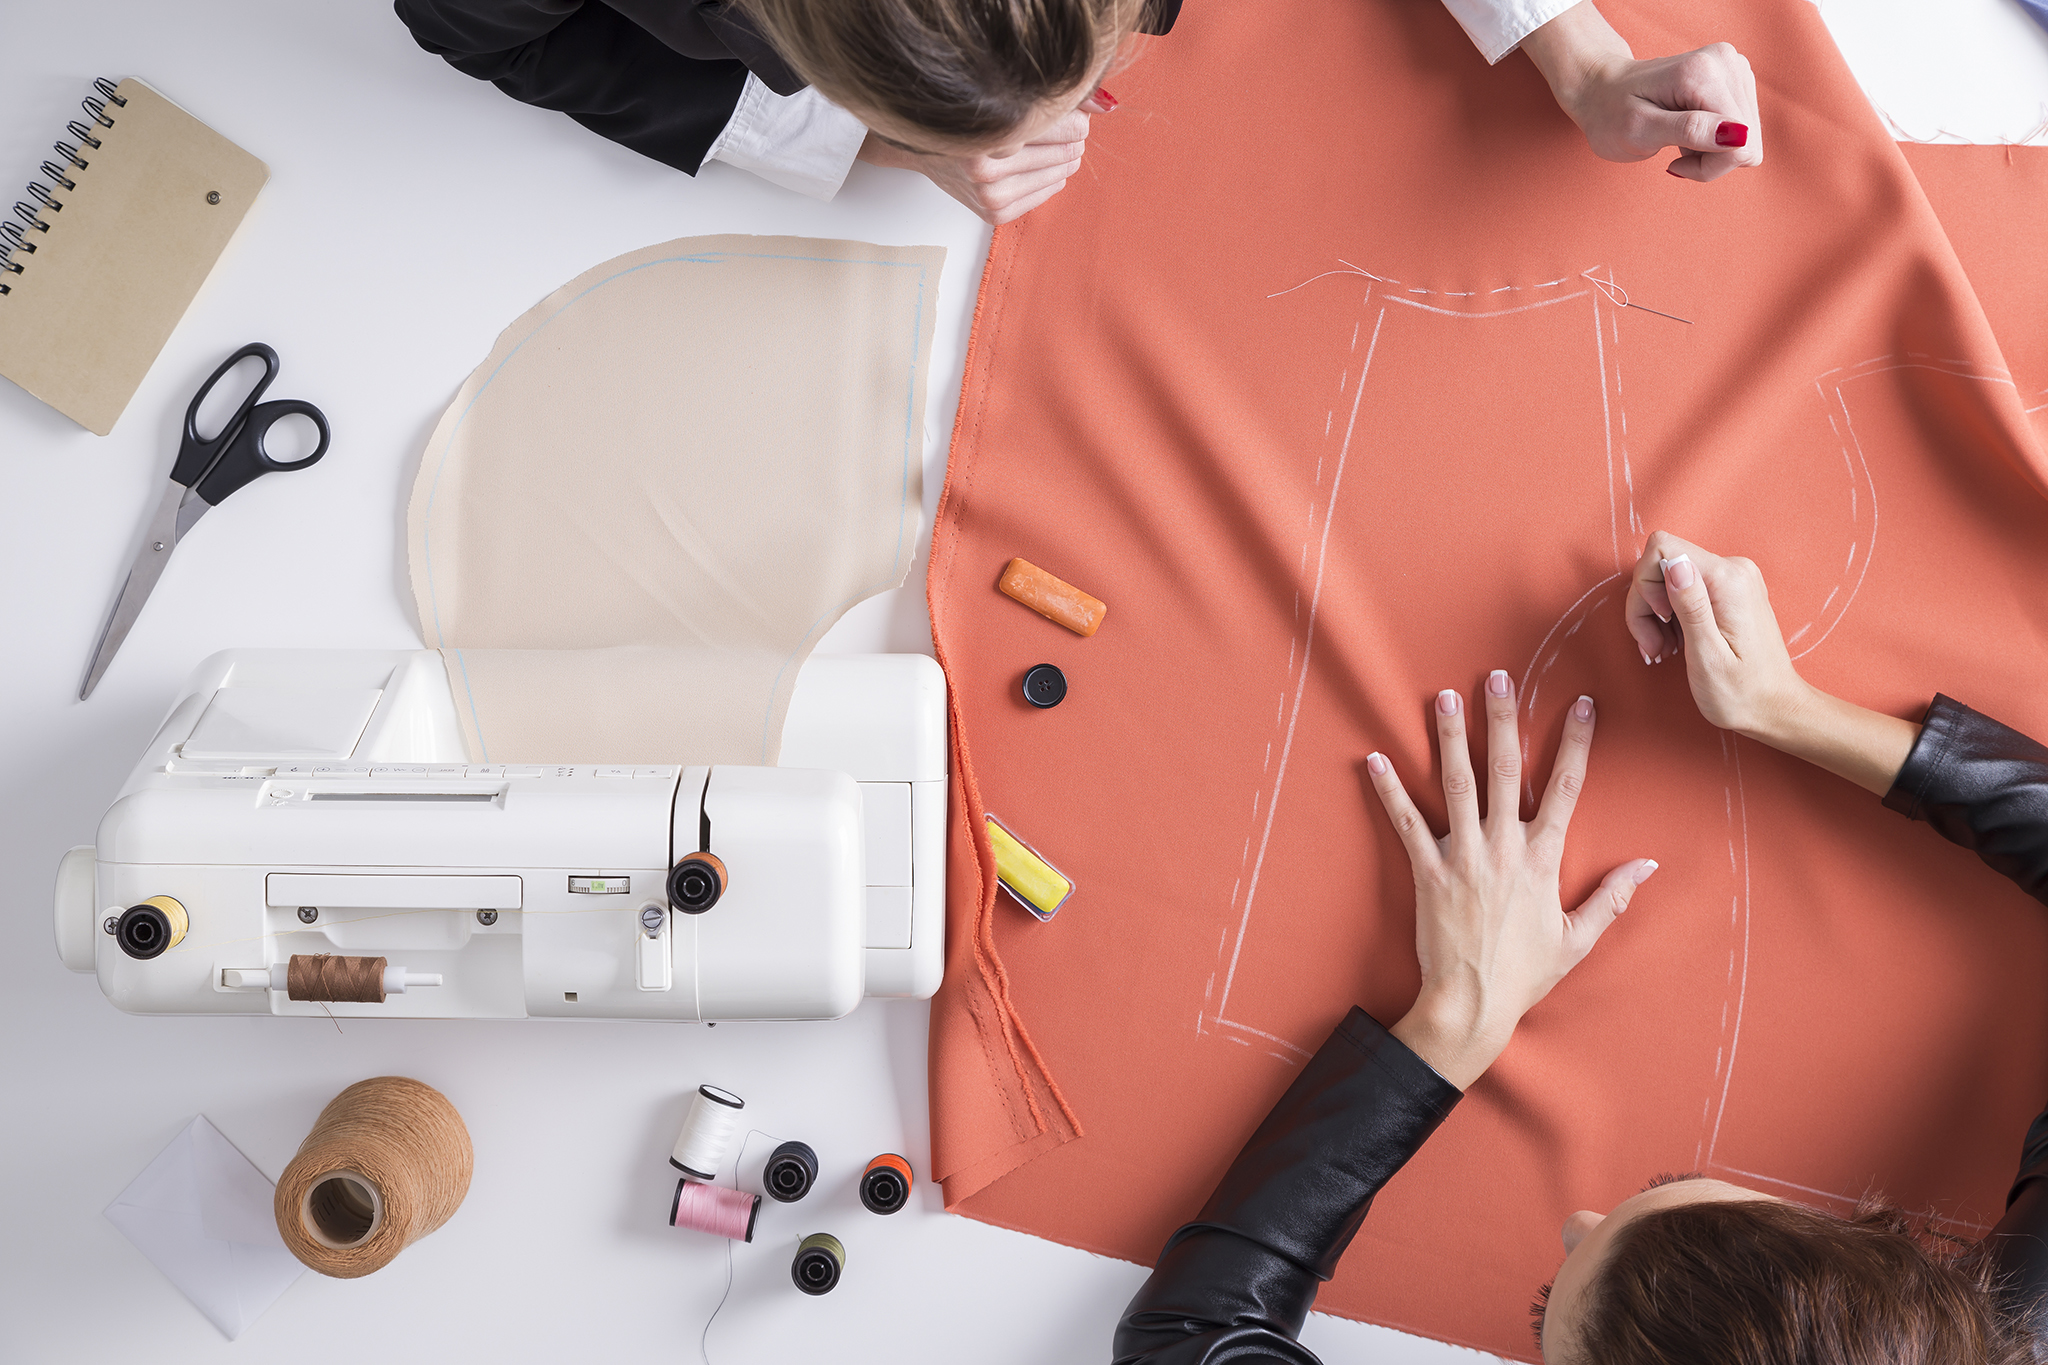 Learn to Sew - Beginner to Advanced Sewing Classes and Tutorials